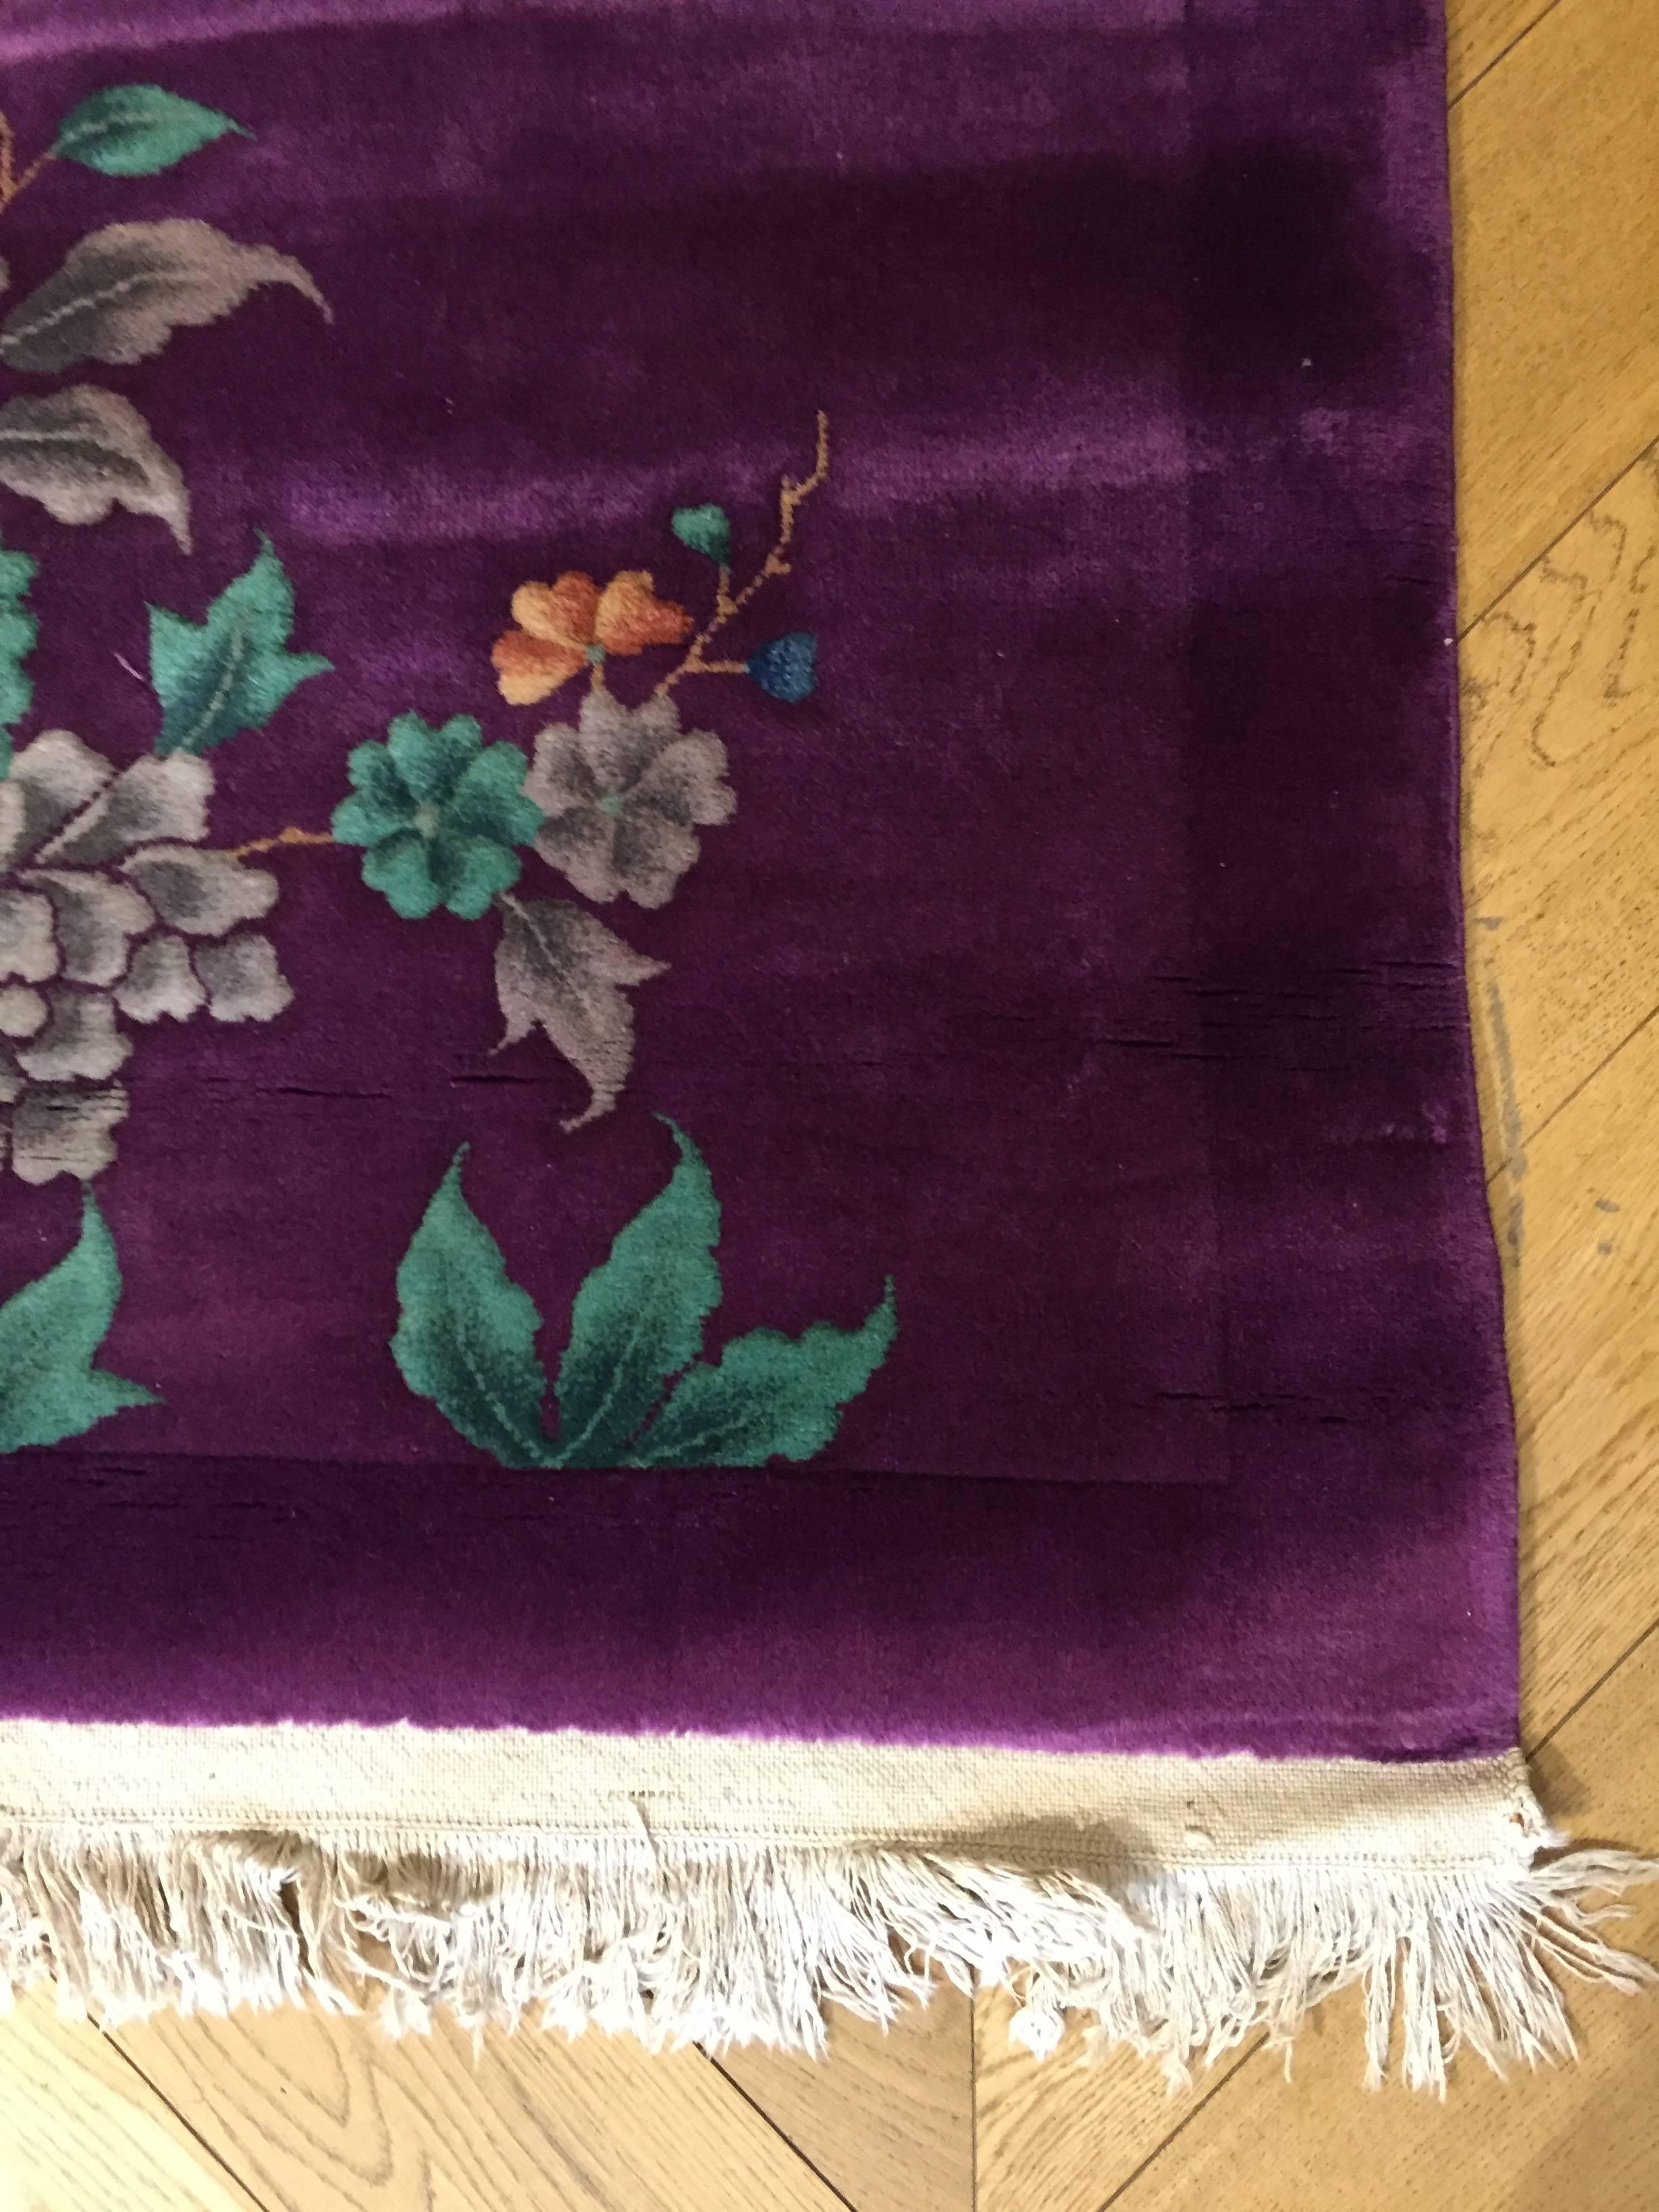 20th Century 1920-1940 Nichols Art Deco Chinese Rug Hand-Knotted Wool Violet 14